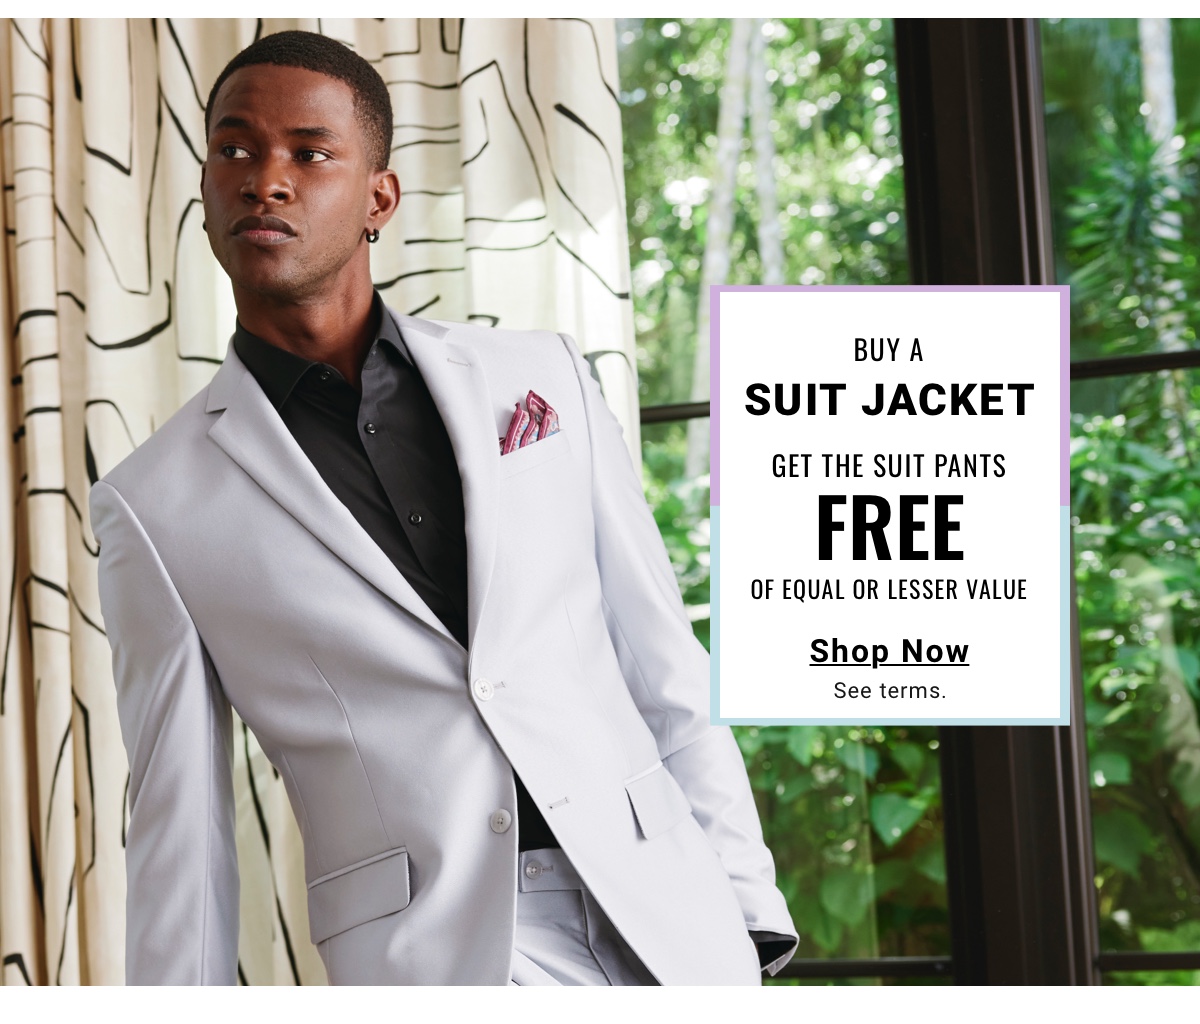 Buy a|Suit Jacket|Get the Suit Pants|Free of Equal or Lesser Value